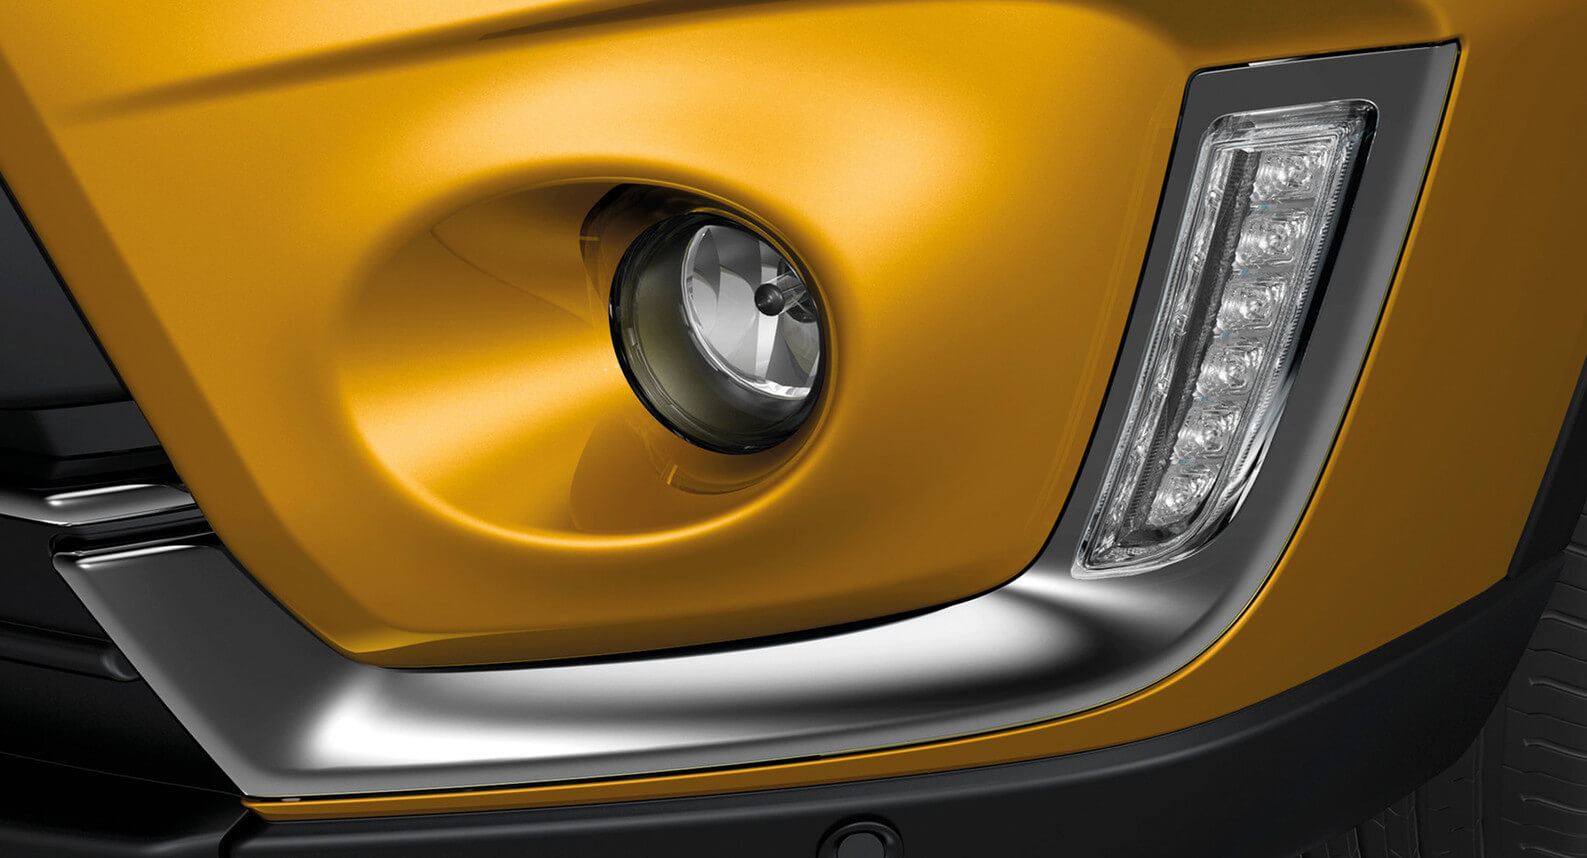 LED daytime running lamps and fog lamps